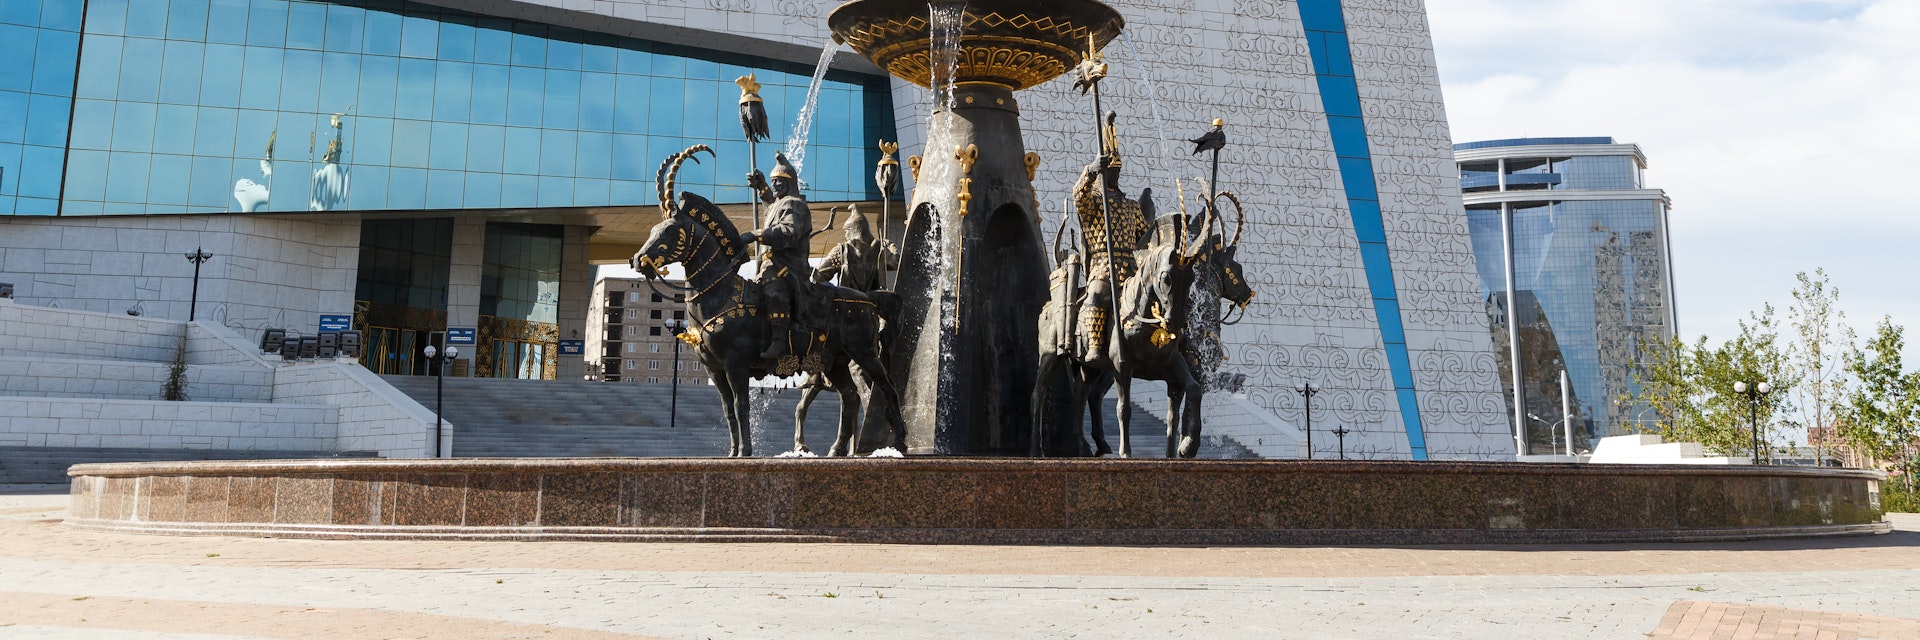 The fountain at the National Museum of Republic of Kazakhstan.